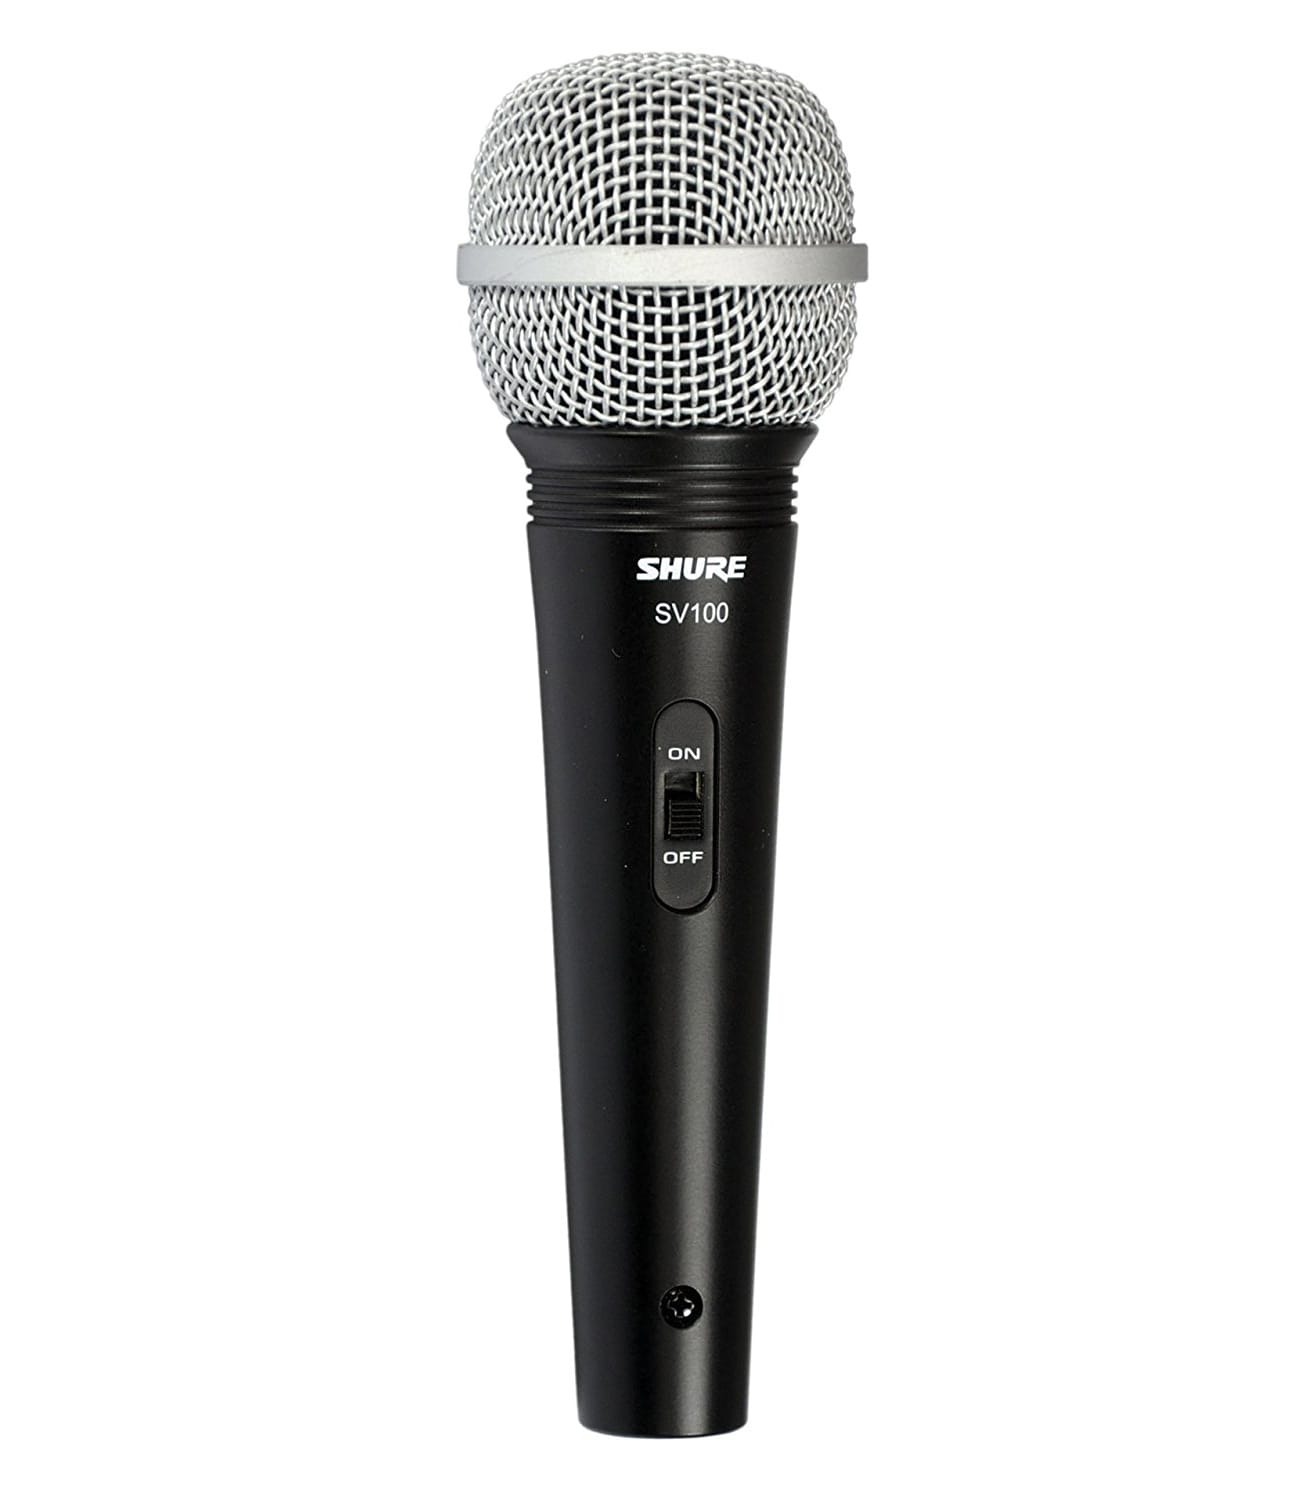 Shure - SV100 Dynamic Microphone with 4.5 m Lead